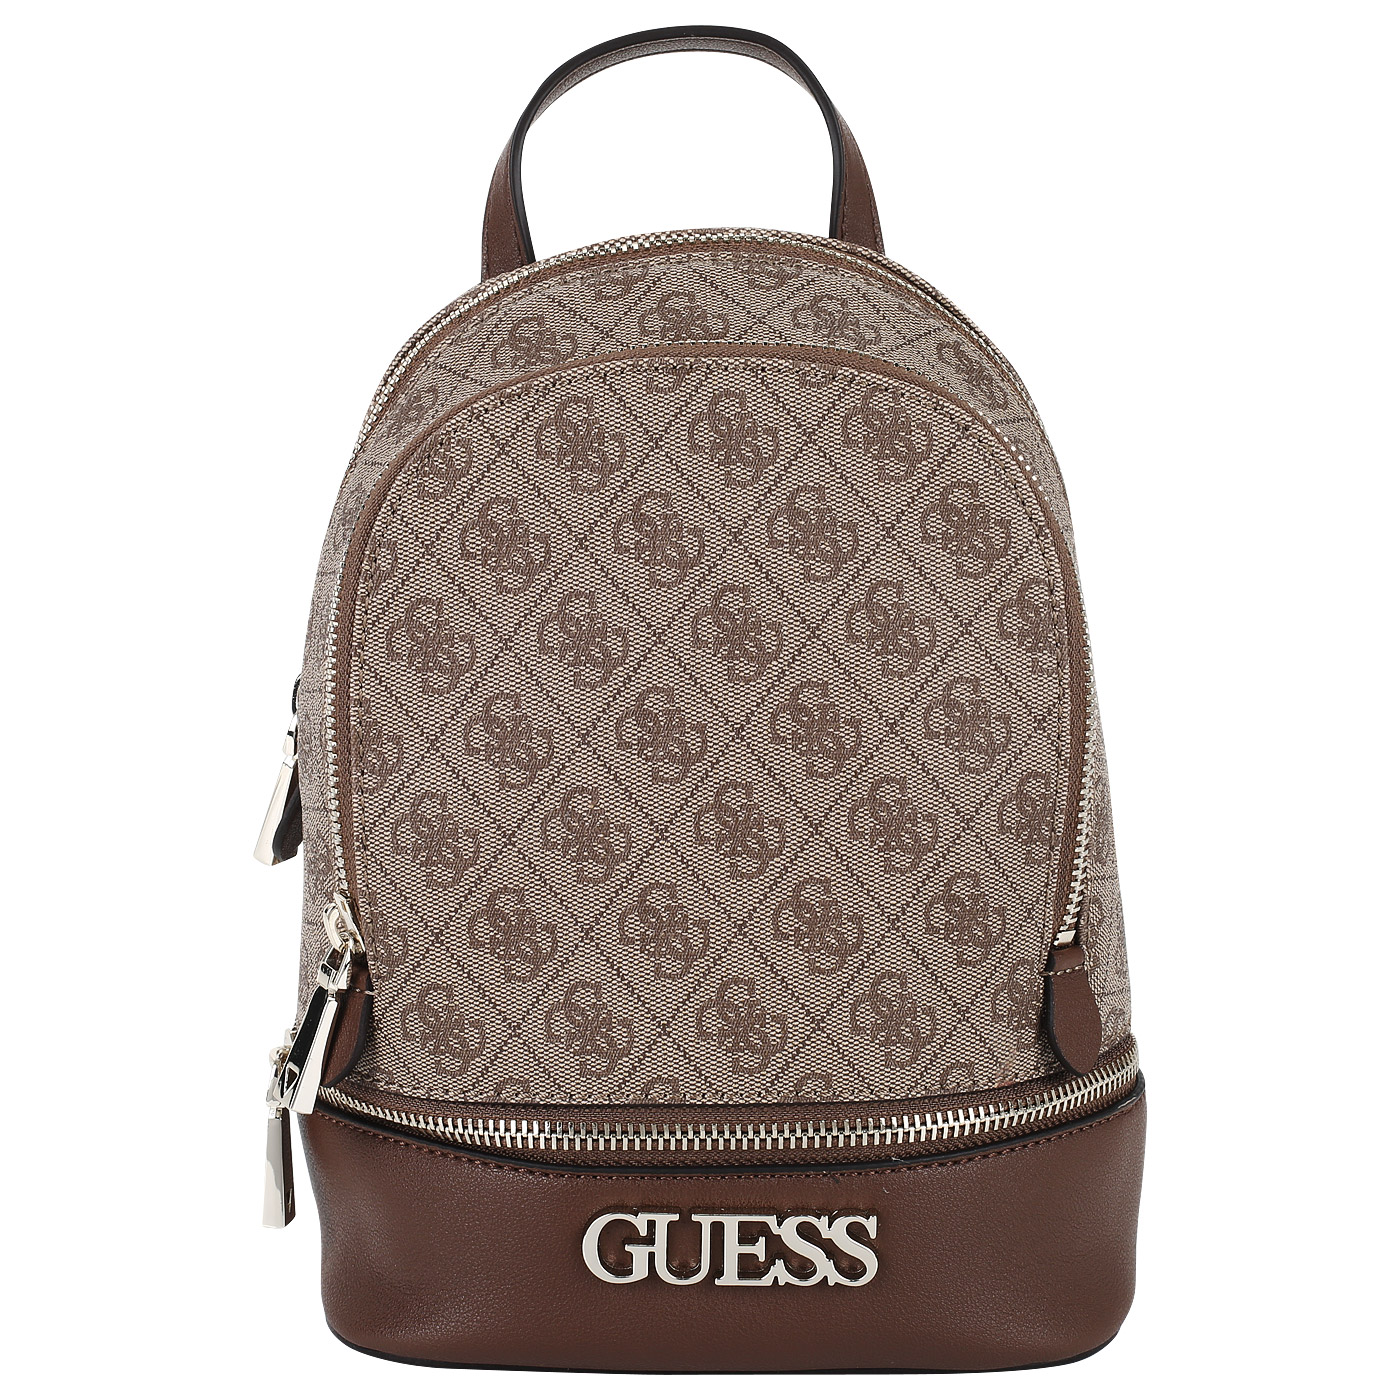 Guess%20The%20Brand%20Game%20Answers%20Level%20114